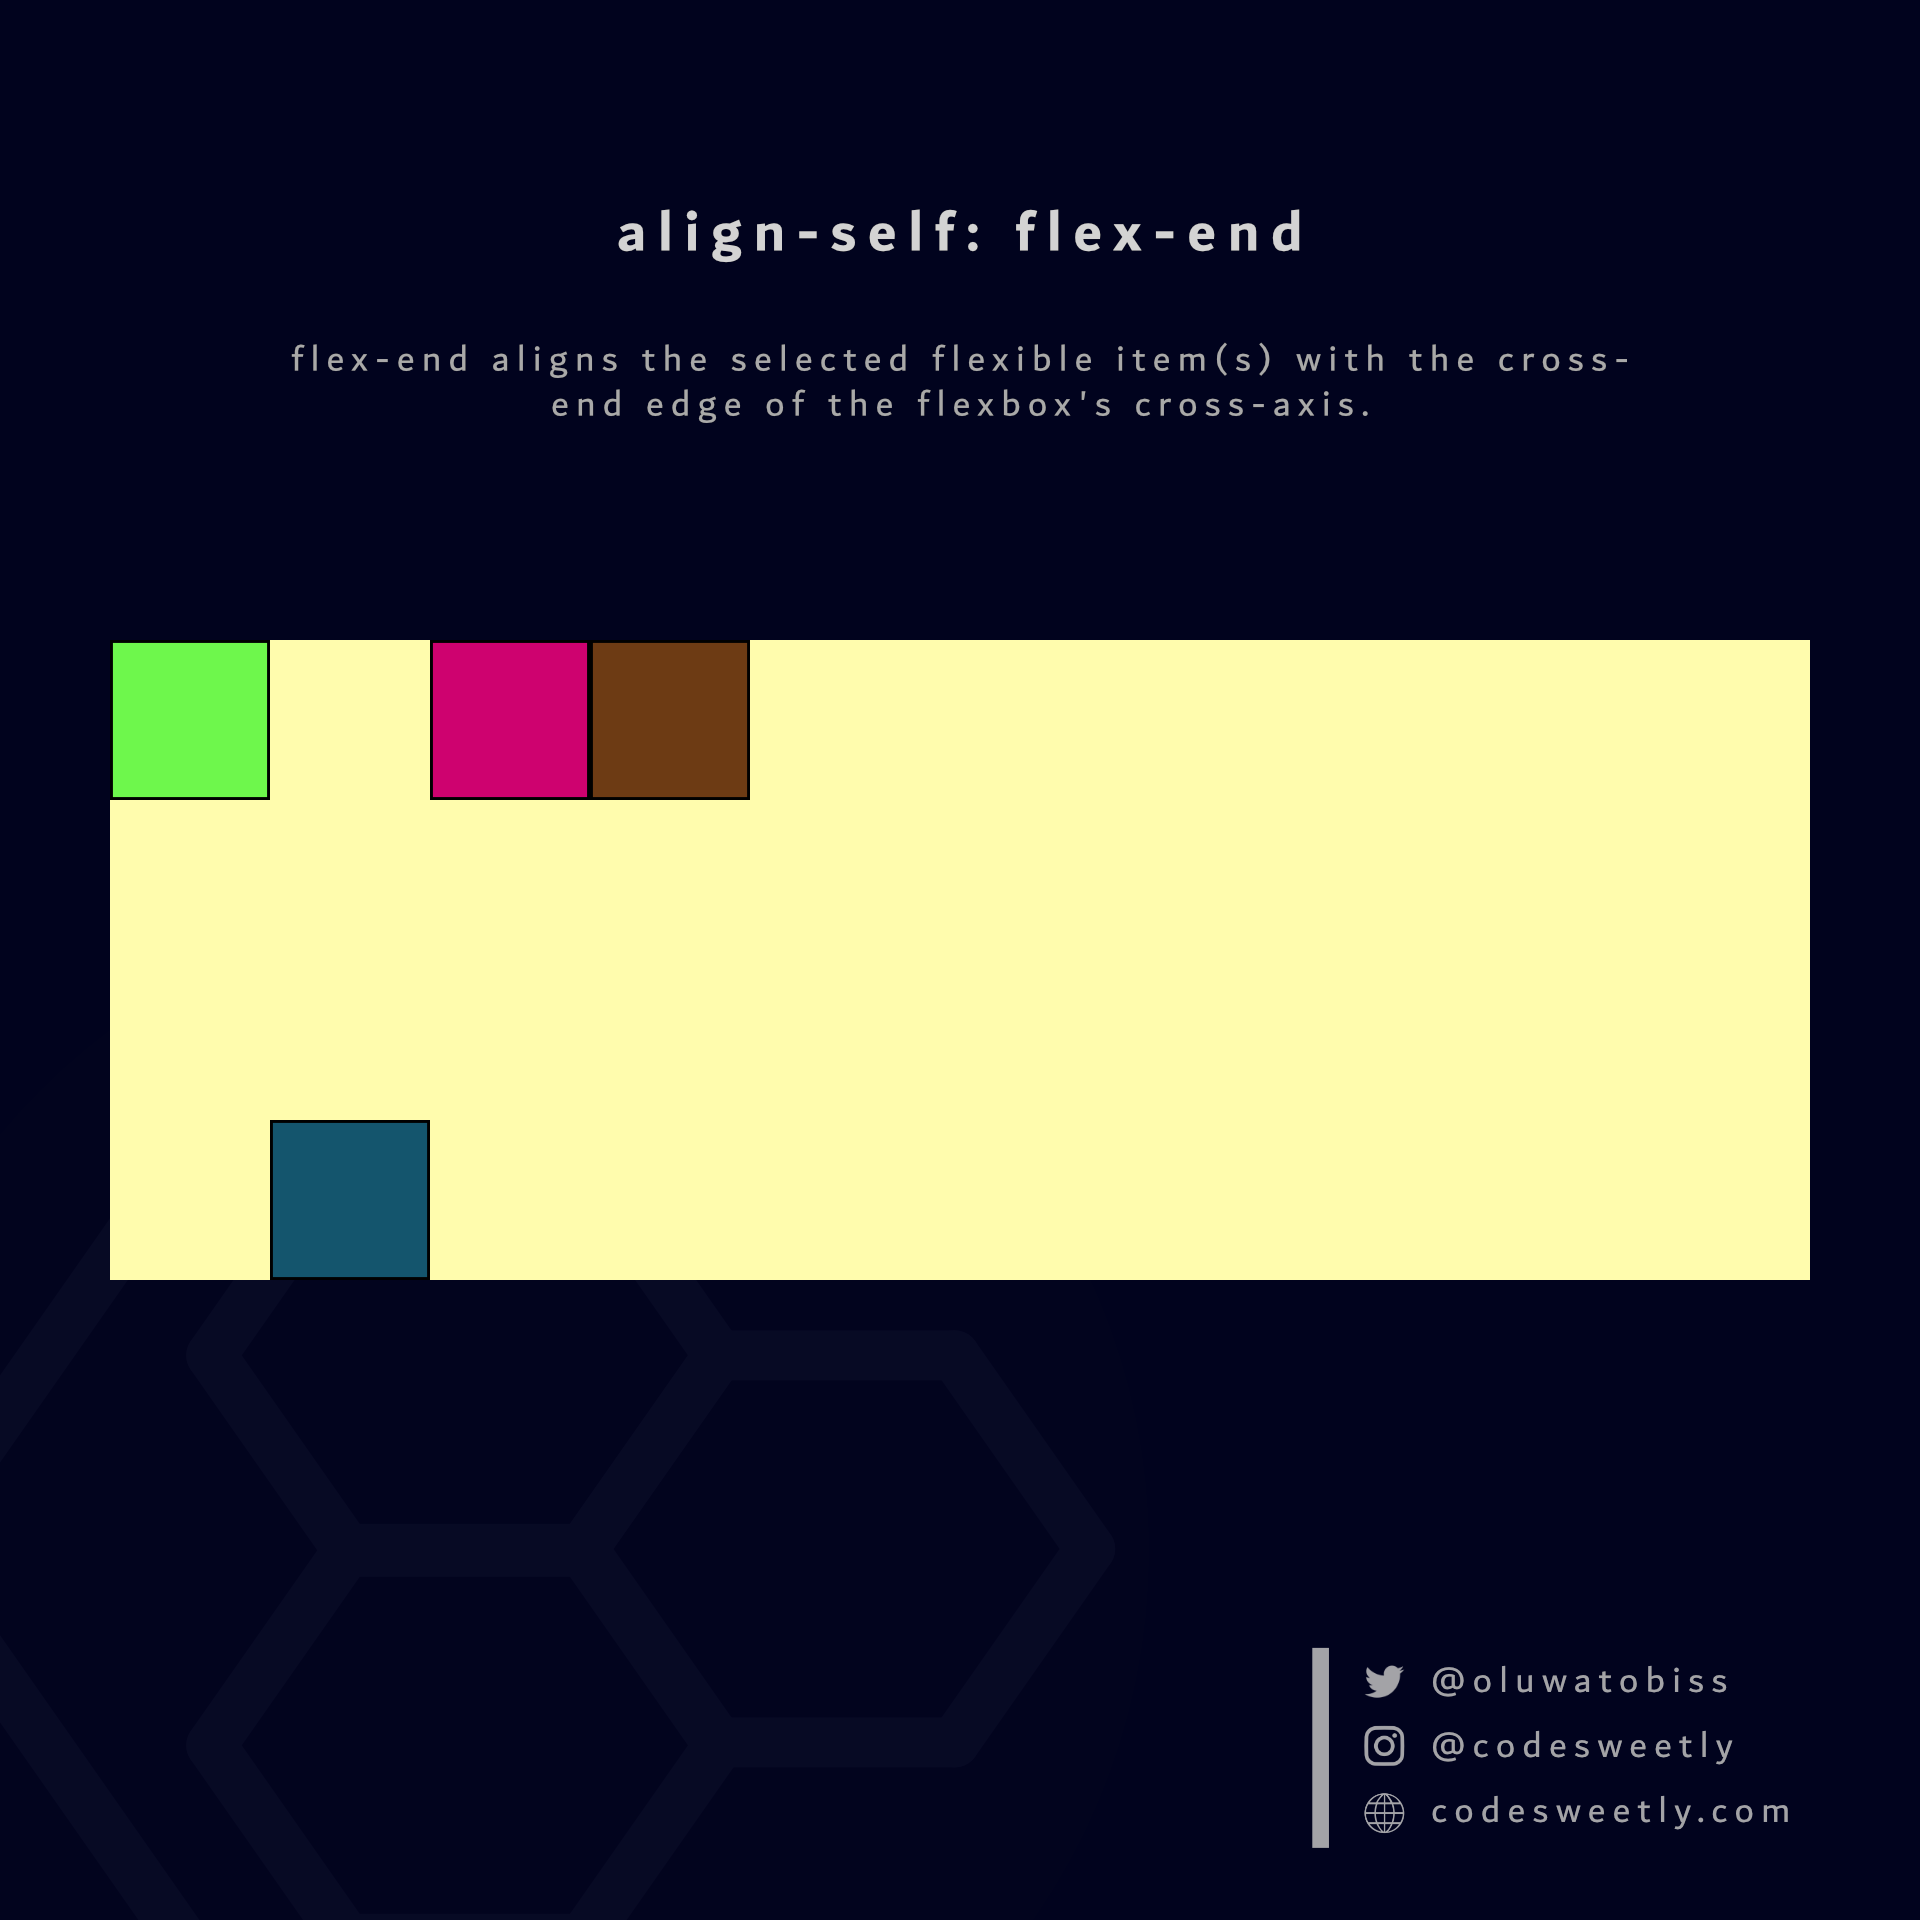 align-self's flex-end value aligns the selected flexible items with the cross-end edge of the flexbox's cross-axis